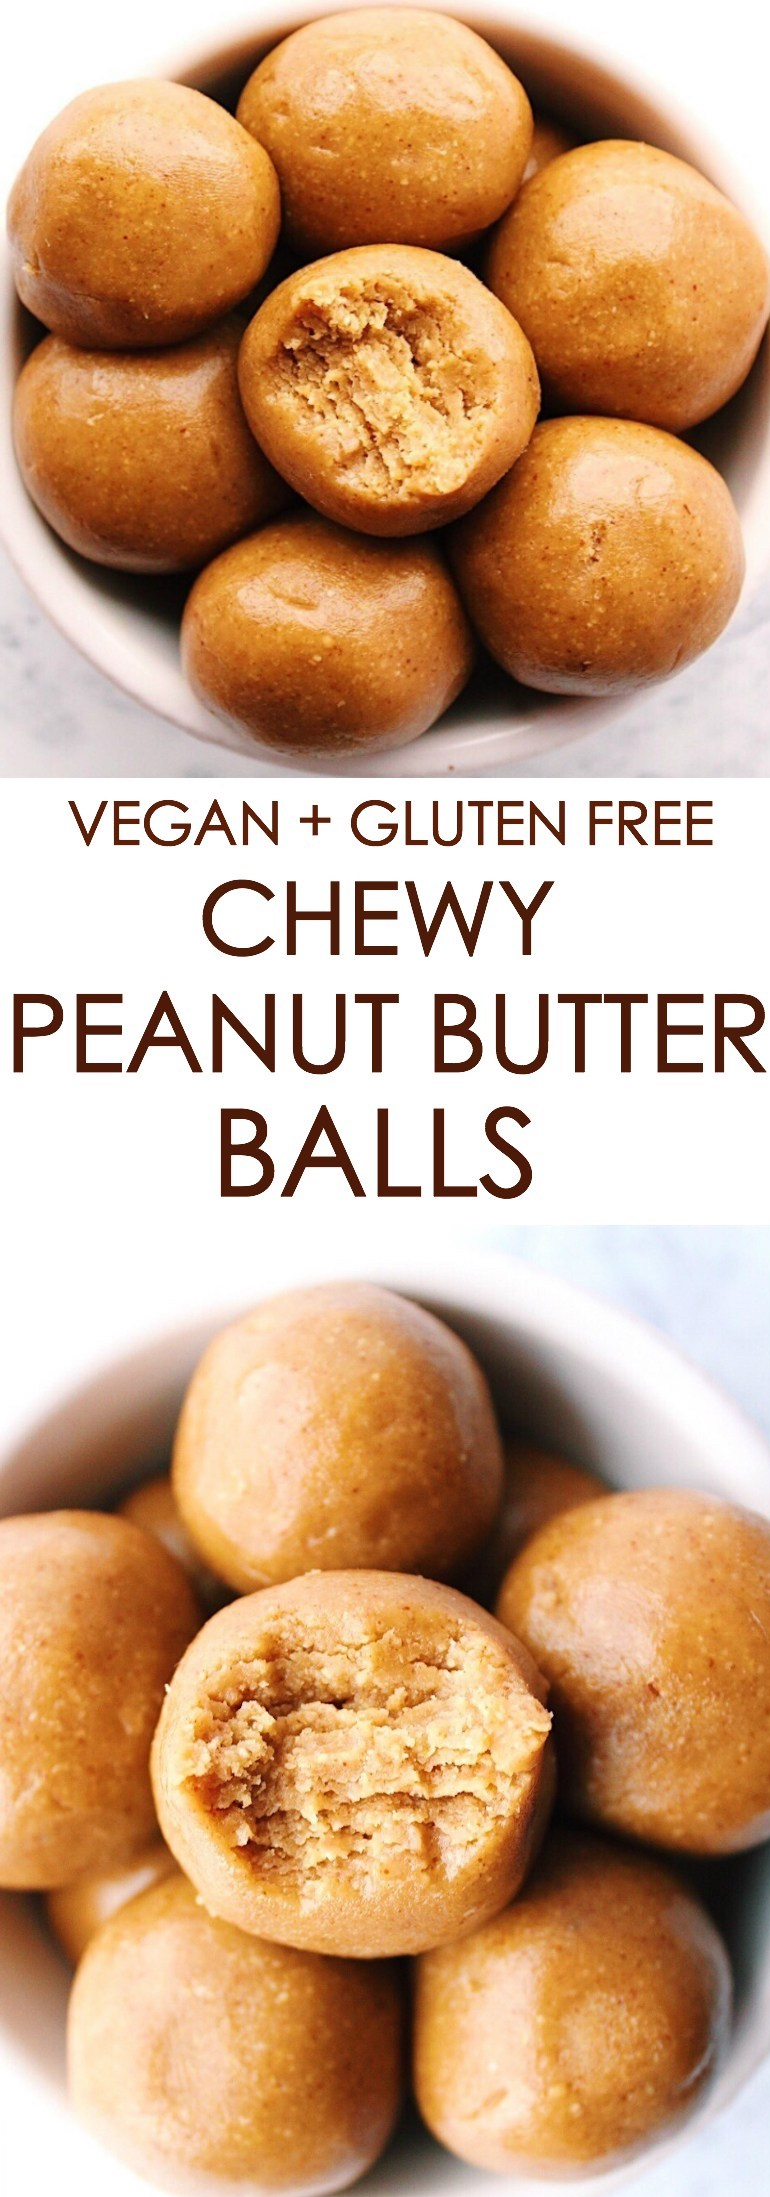 Chewy Peanut Butter Balls